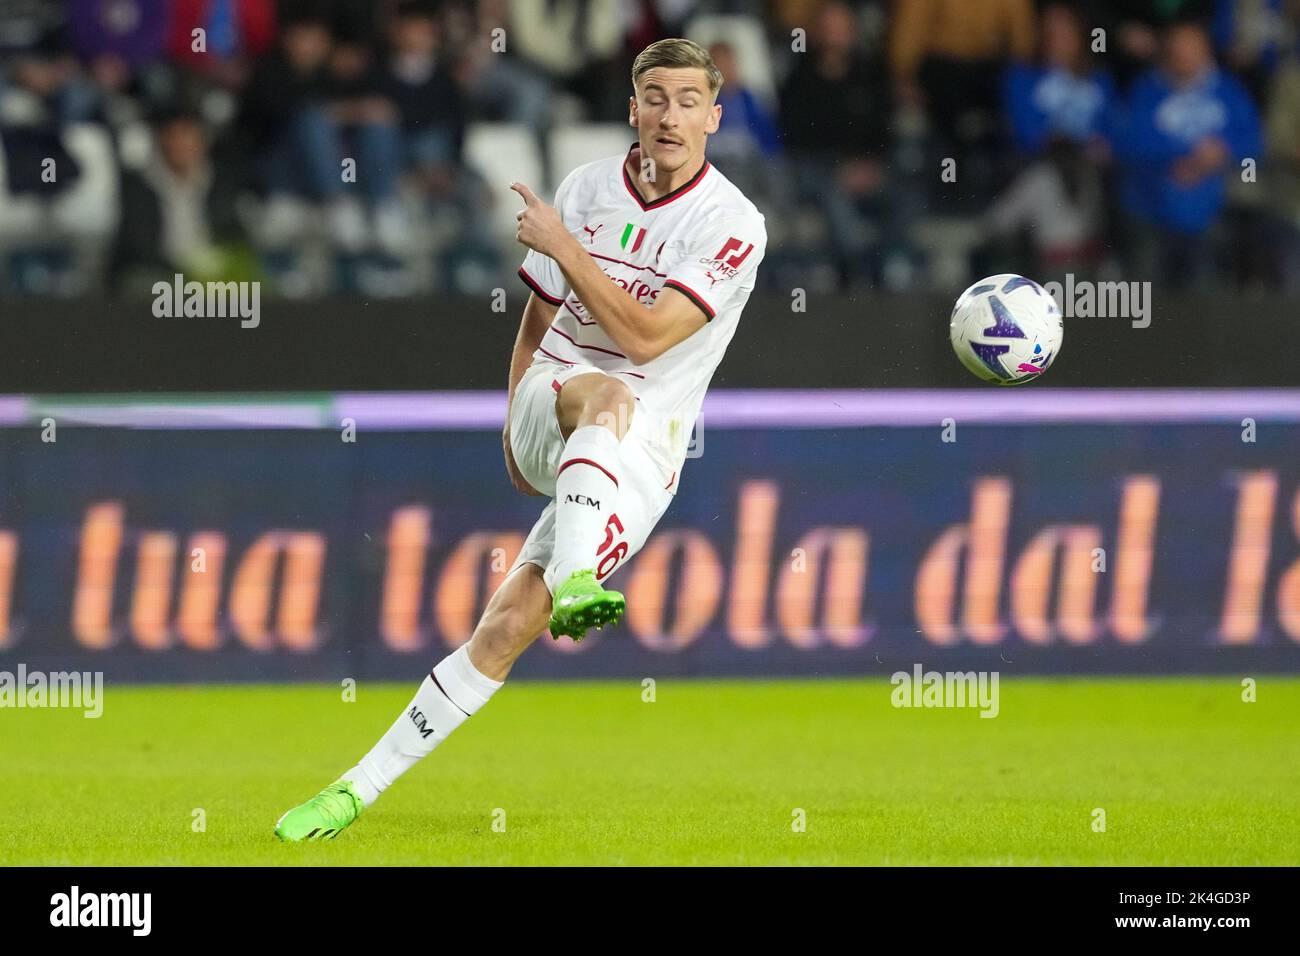 Empoli, Italy. 01st Oct, 2022. Alexis Saelemaekers of AC Milan in action during the Serie A 2022/2023 football match between Empoli and AC Milan at Castellani stadium in Empoli (Italy), October 1st, 2022. Photo Paolo Nucci/Insidefoto Credit: Insidefoto di andrea staccioli/Alamy Live News Stock Photo